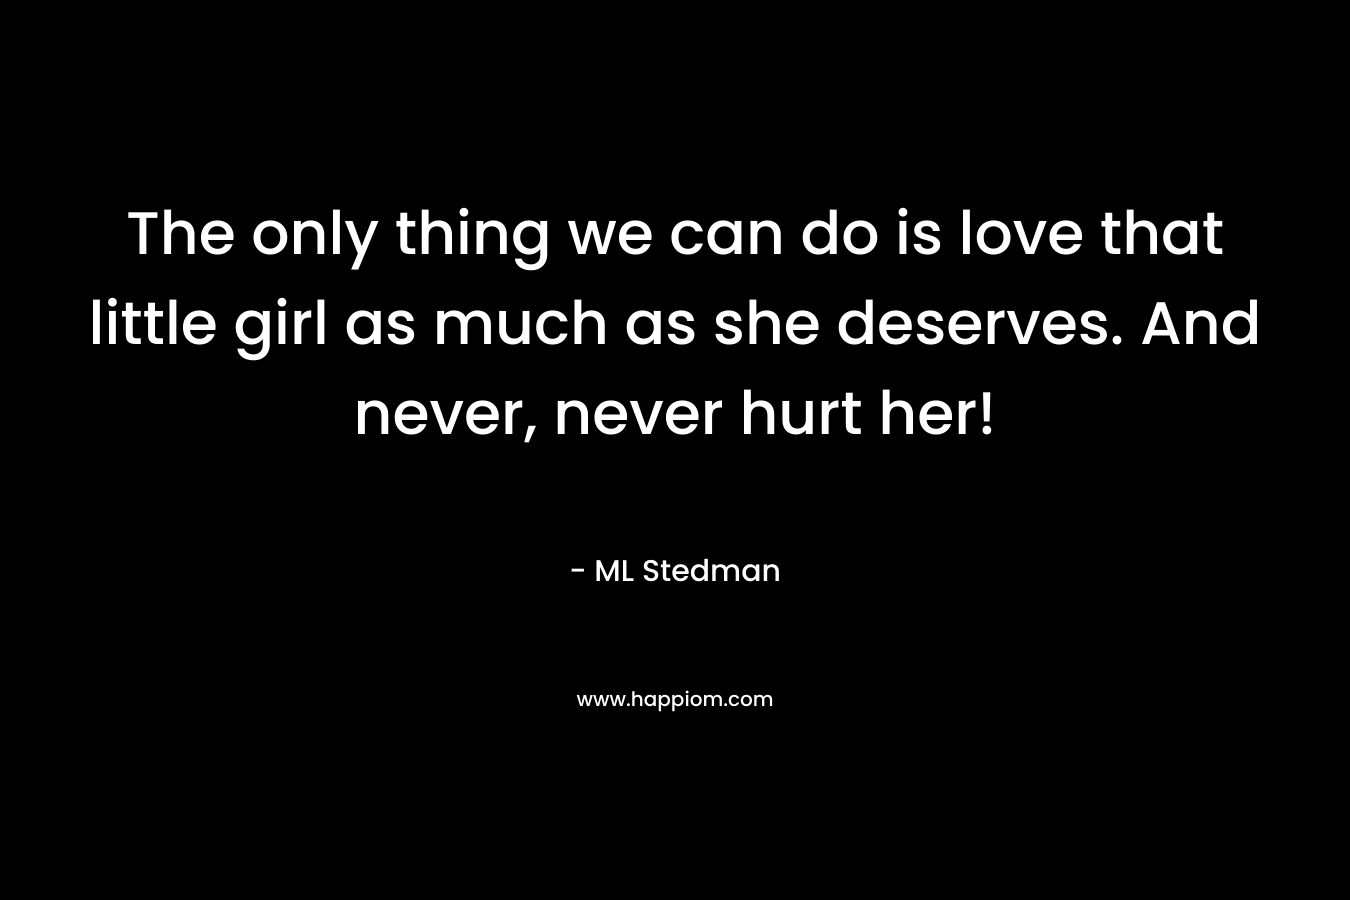 The only thing we can do is love that little girl as much as she deserves. And never, never hurt her! – ML Stedman